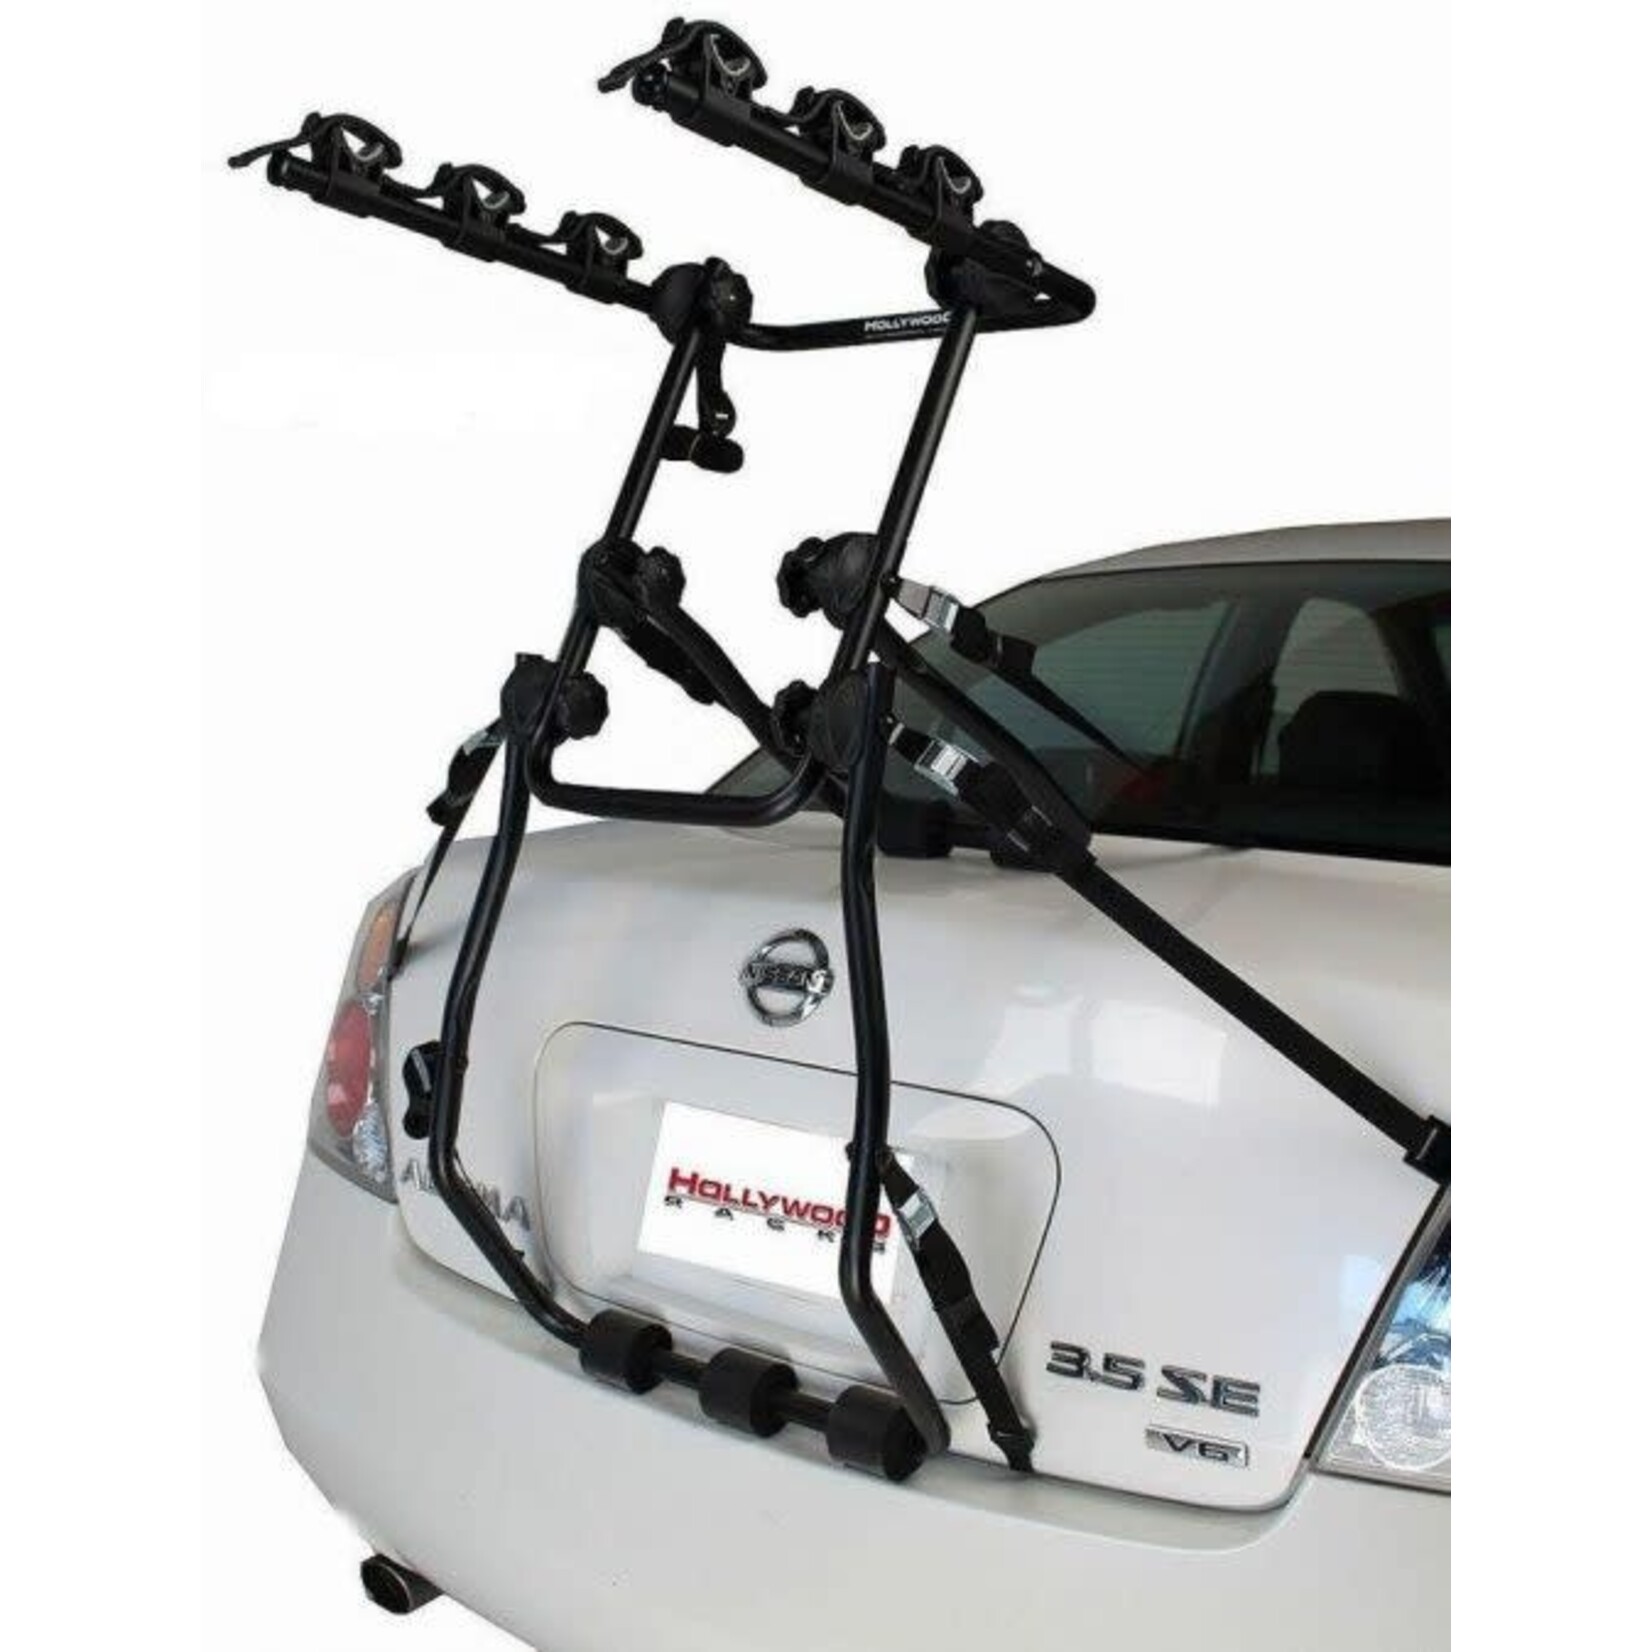 Hollywood Over-The Top F10 3-Bike Trunk Rack